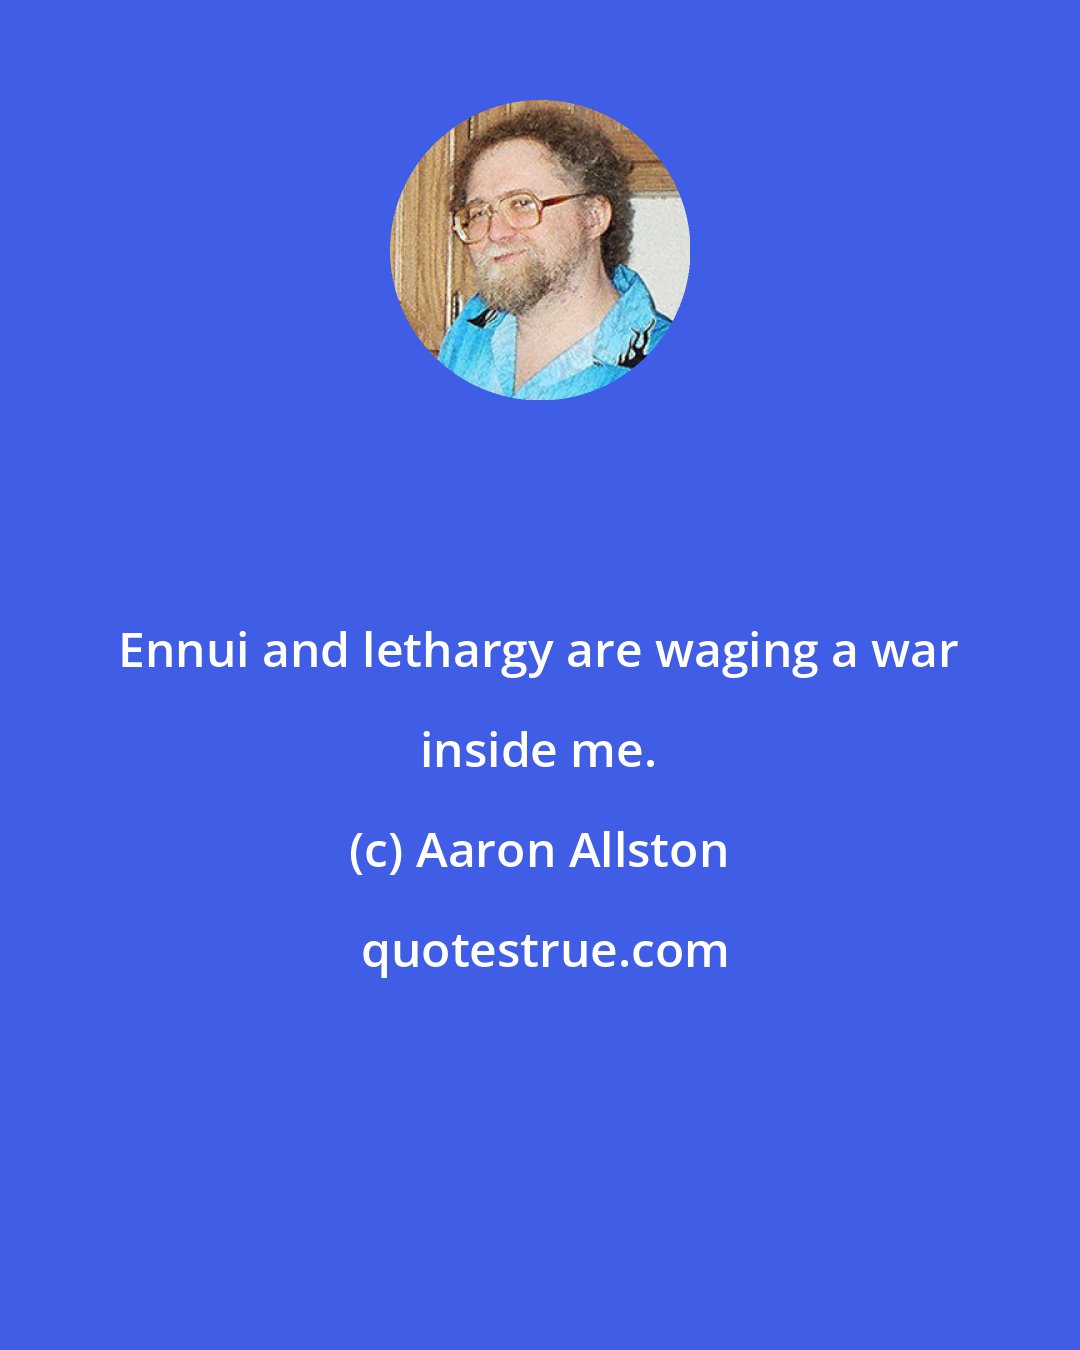 Aaron Allston: Ennui and lethargy are waging a war inside me.